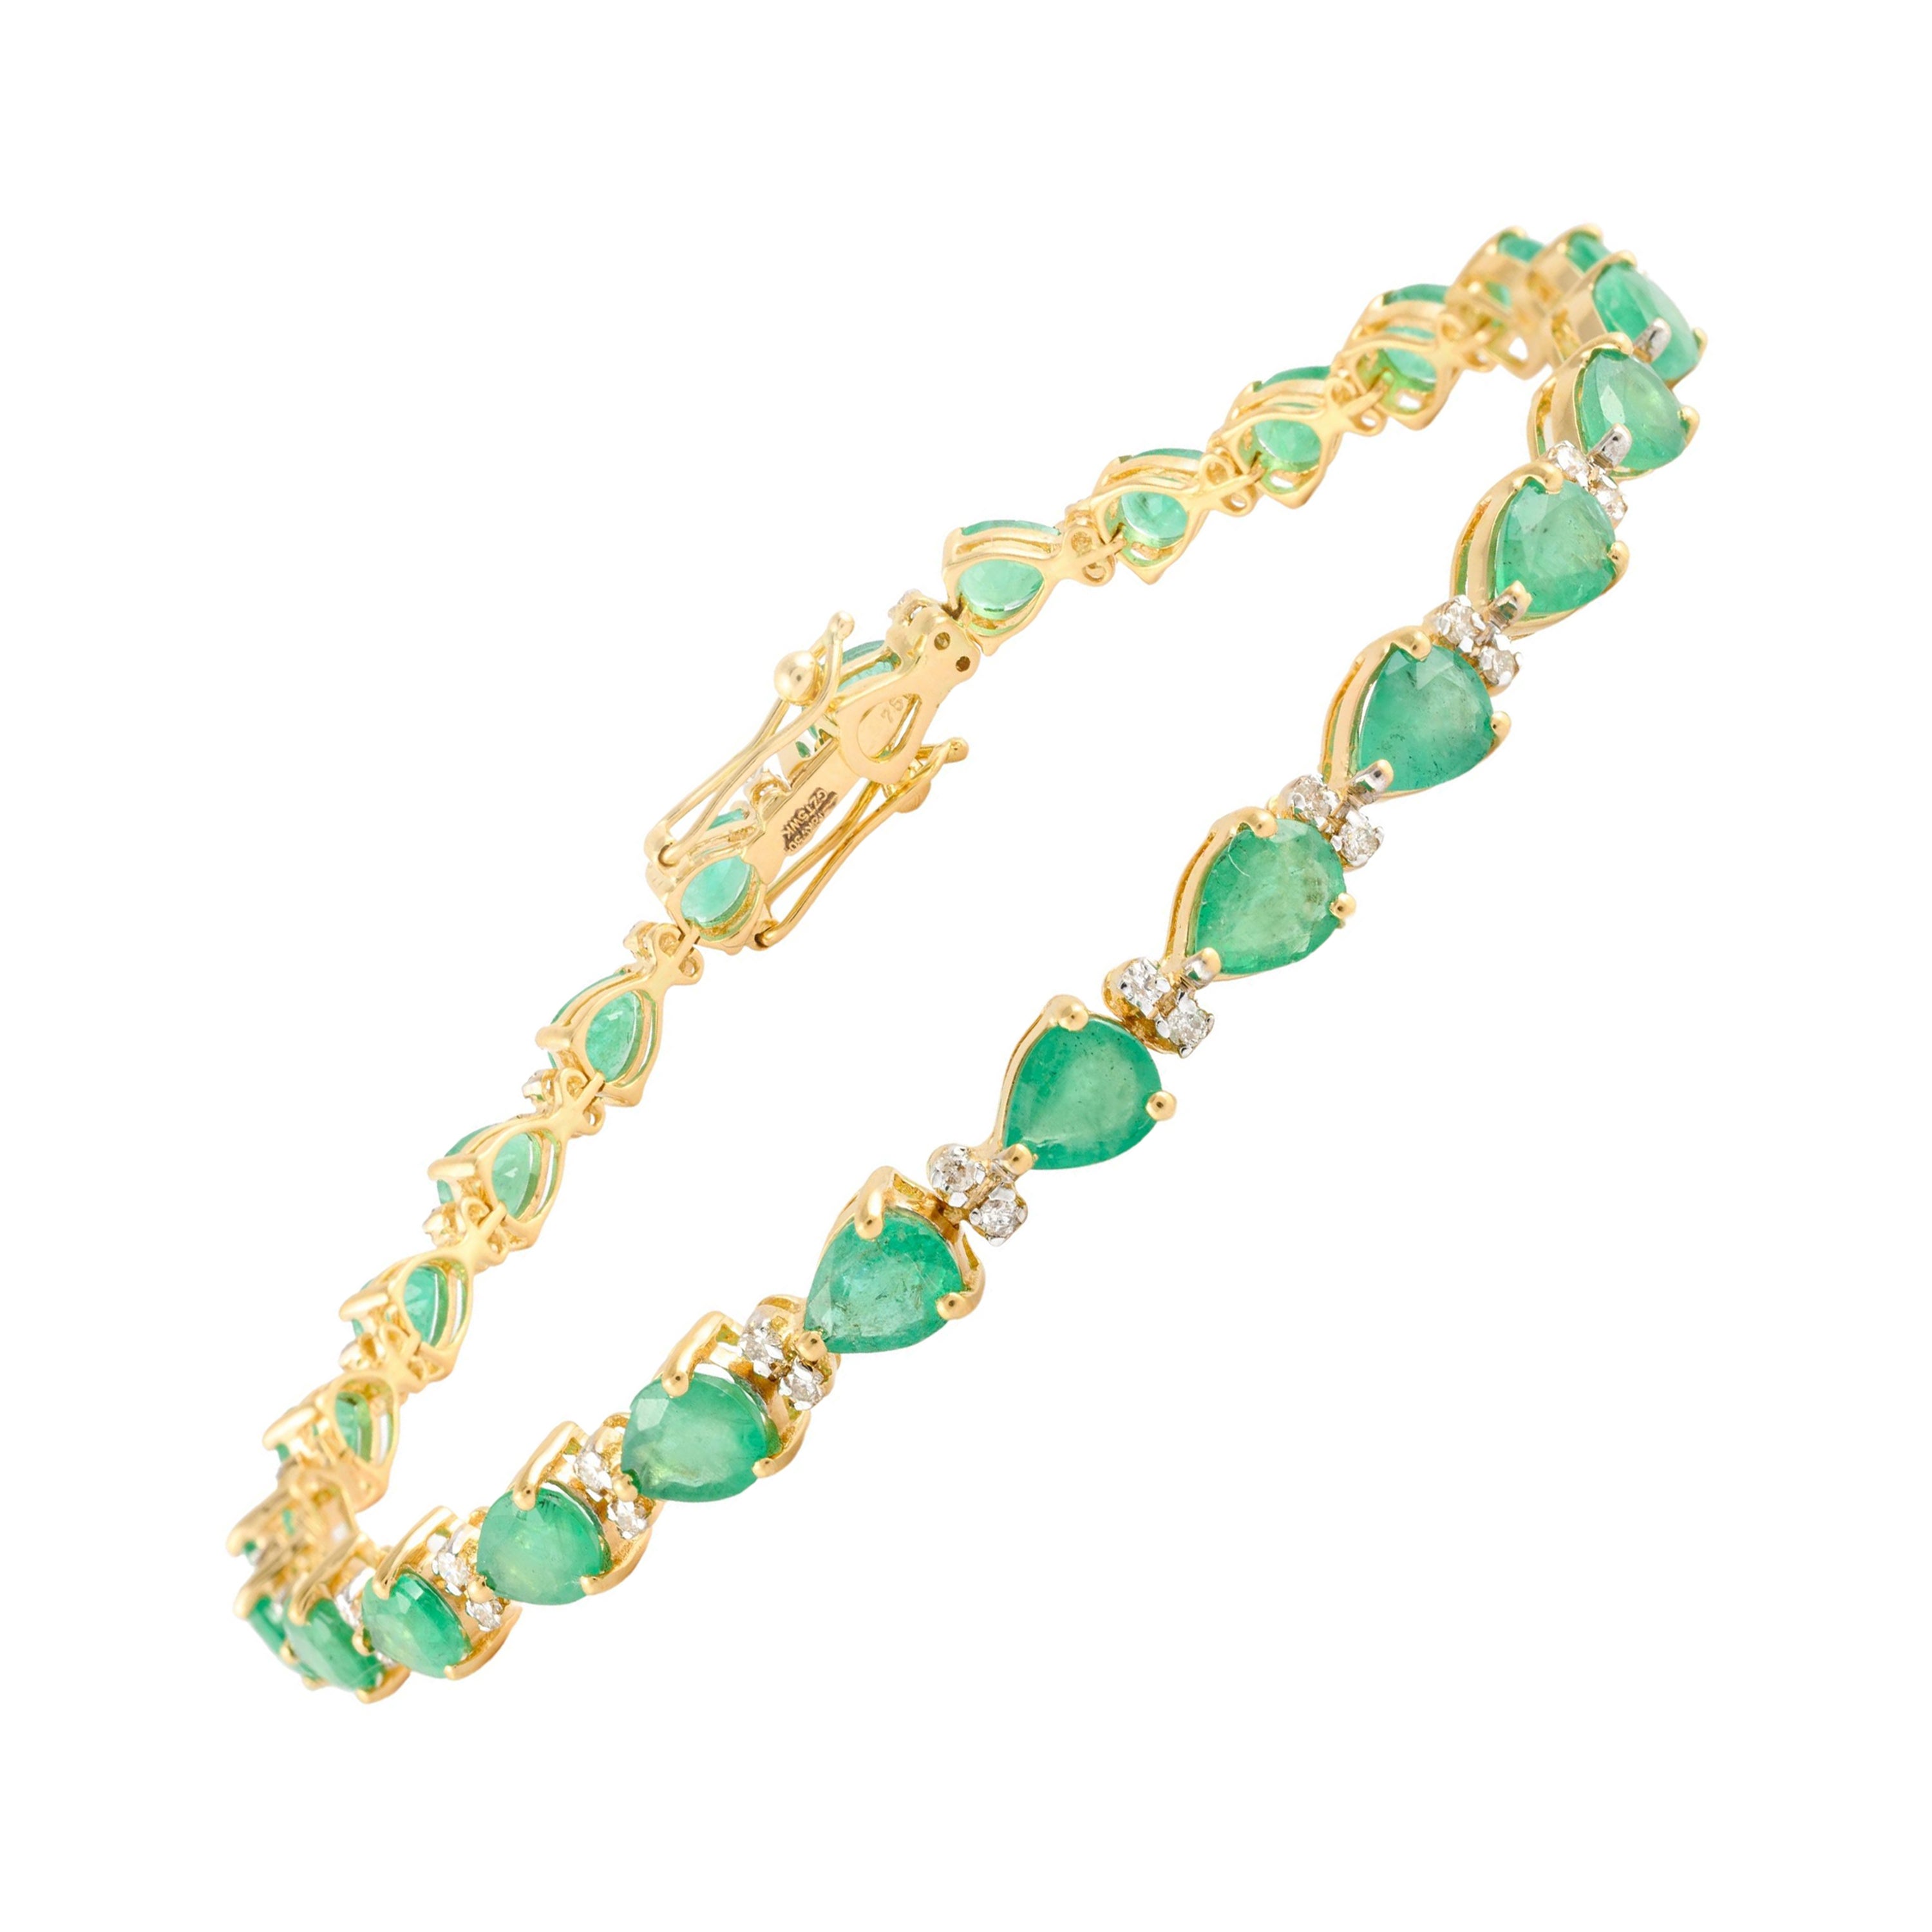 Natural Pear Cut Emerald Diamond Bracelet Made in 18k Solid Yellow Gold For Sale